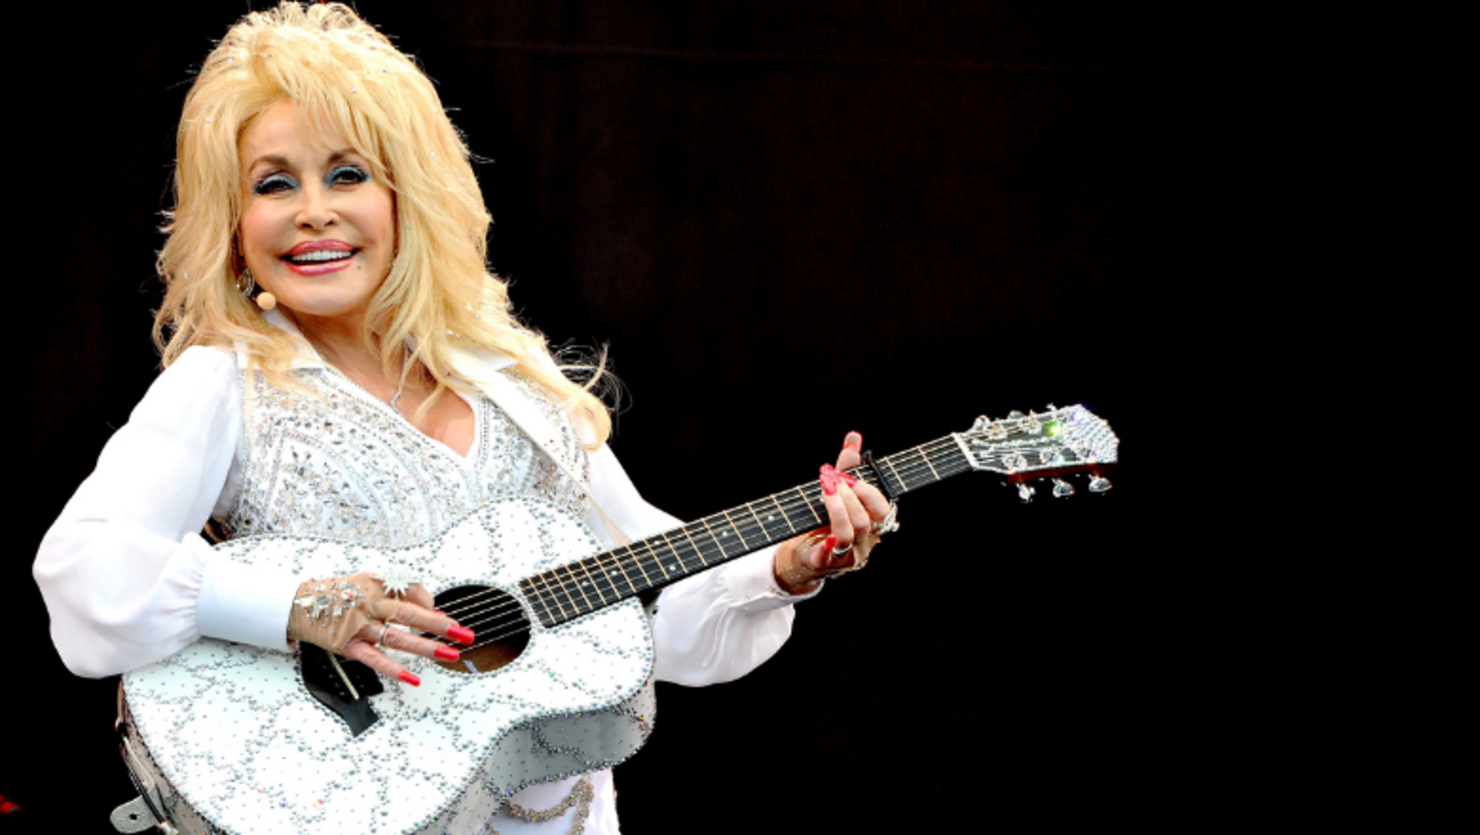 Dolly Parton Moved Stephen Colbert To Tears During Impromptu Performance